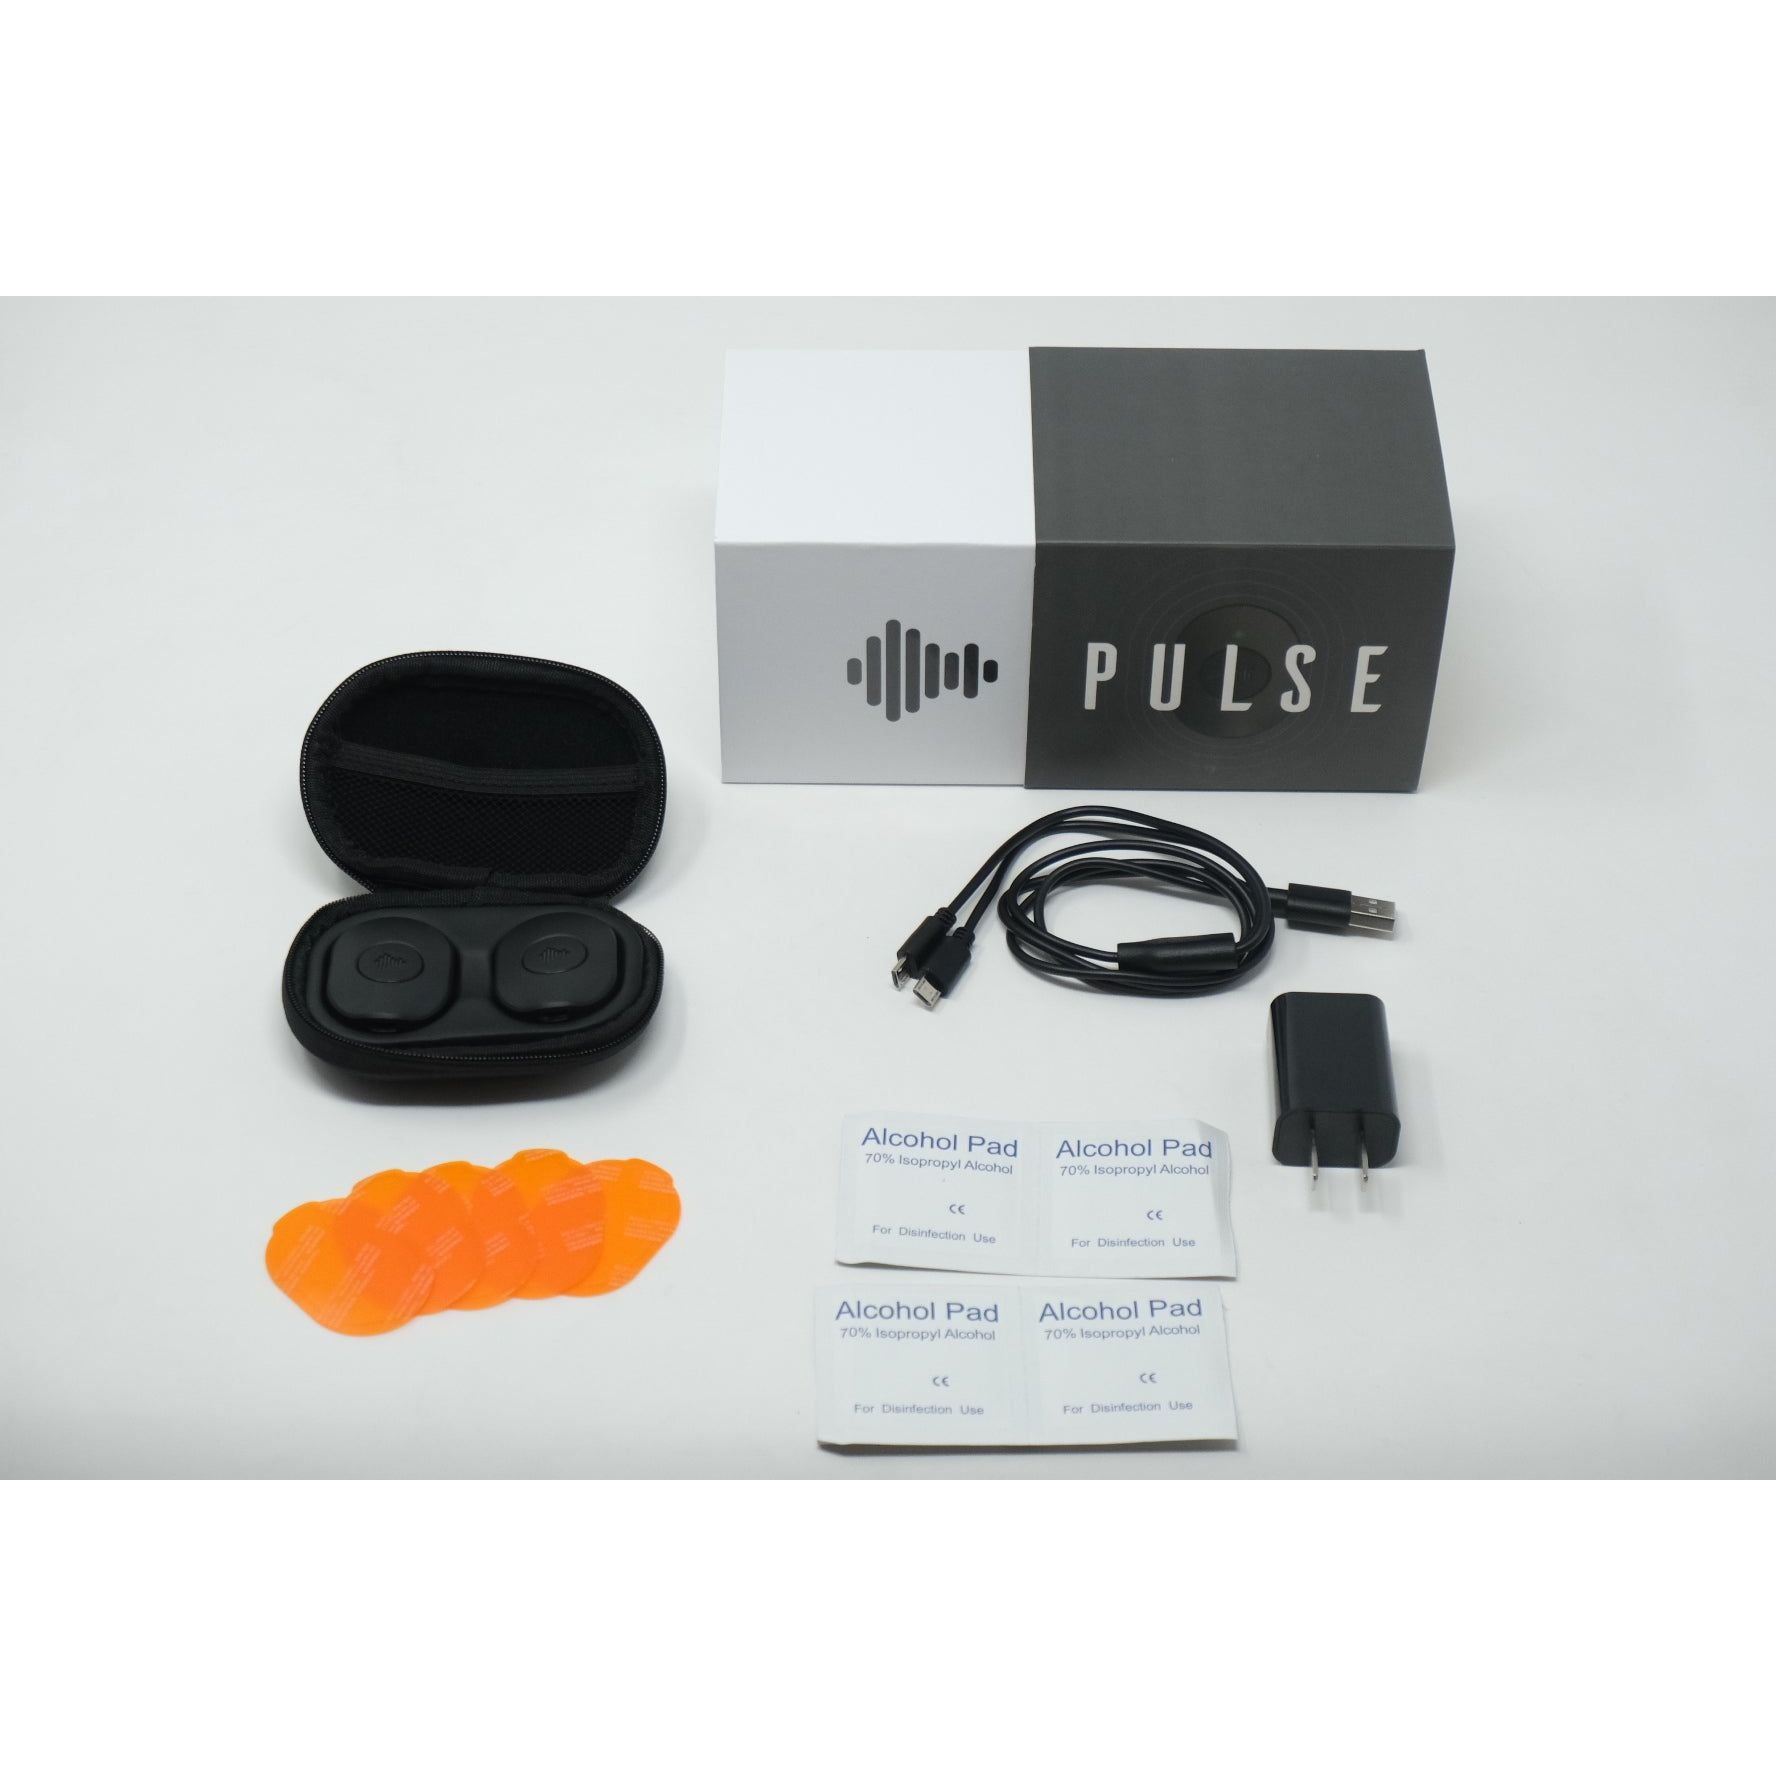 Pulse All-in-One Kit